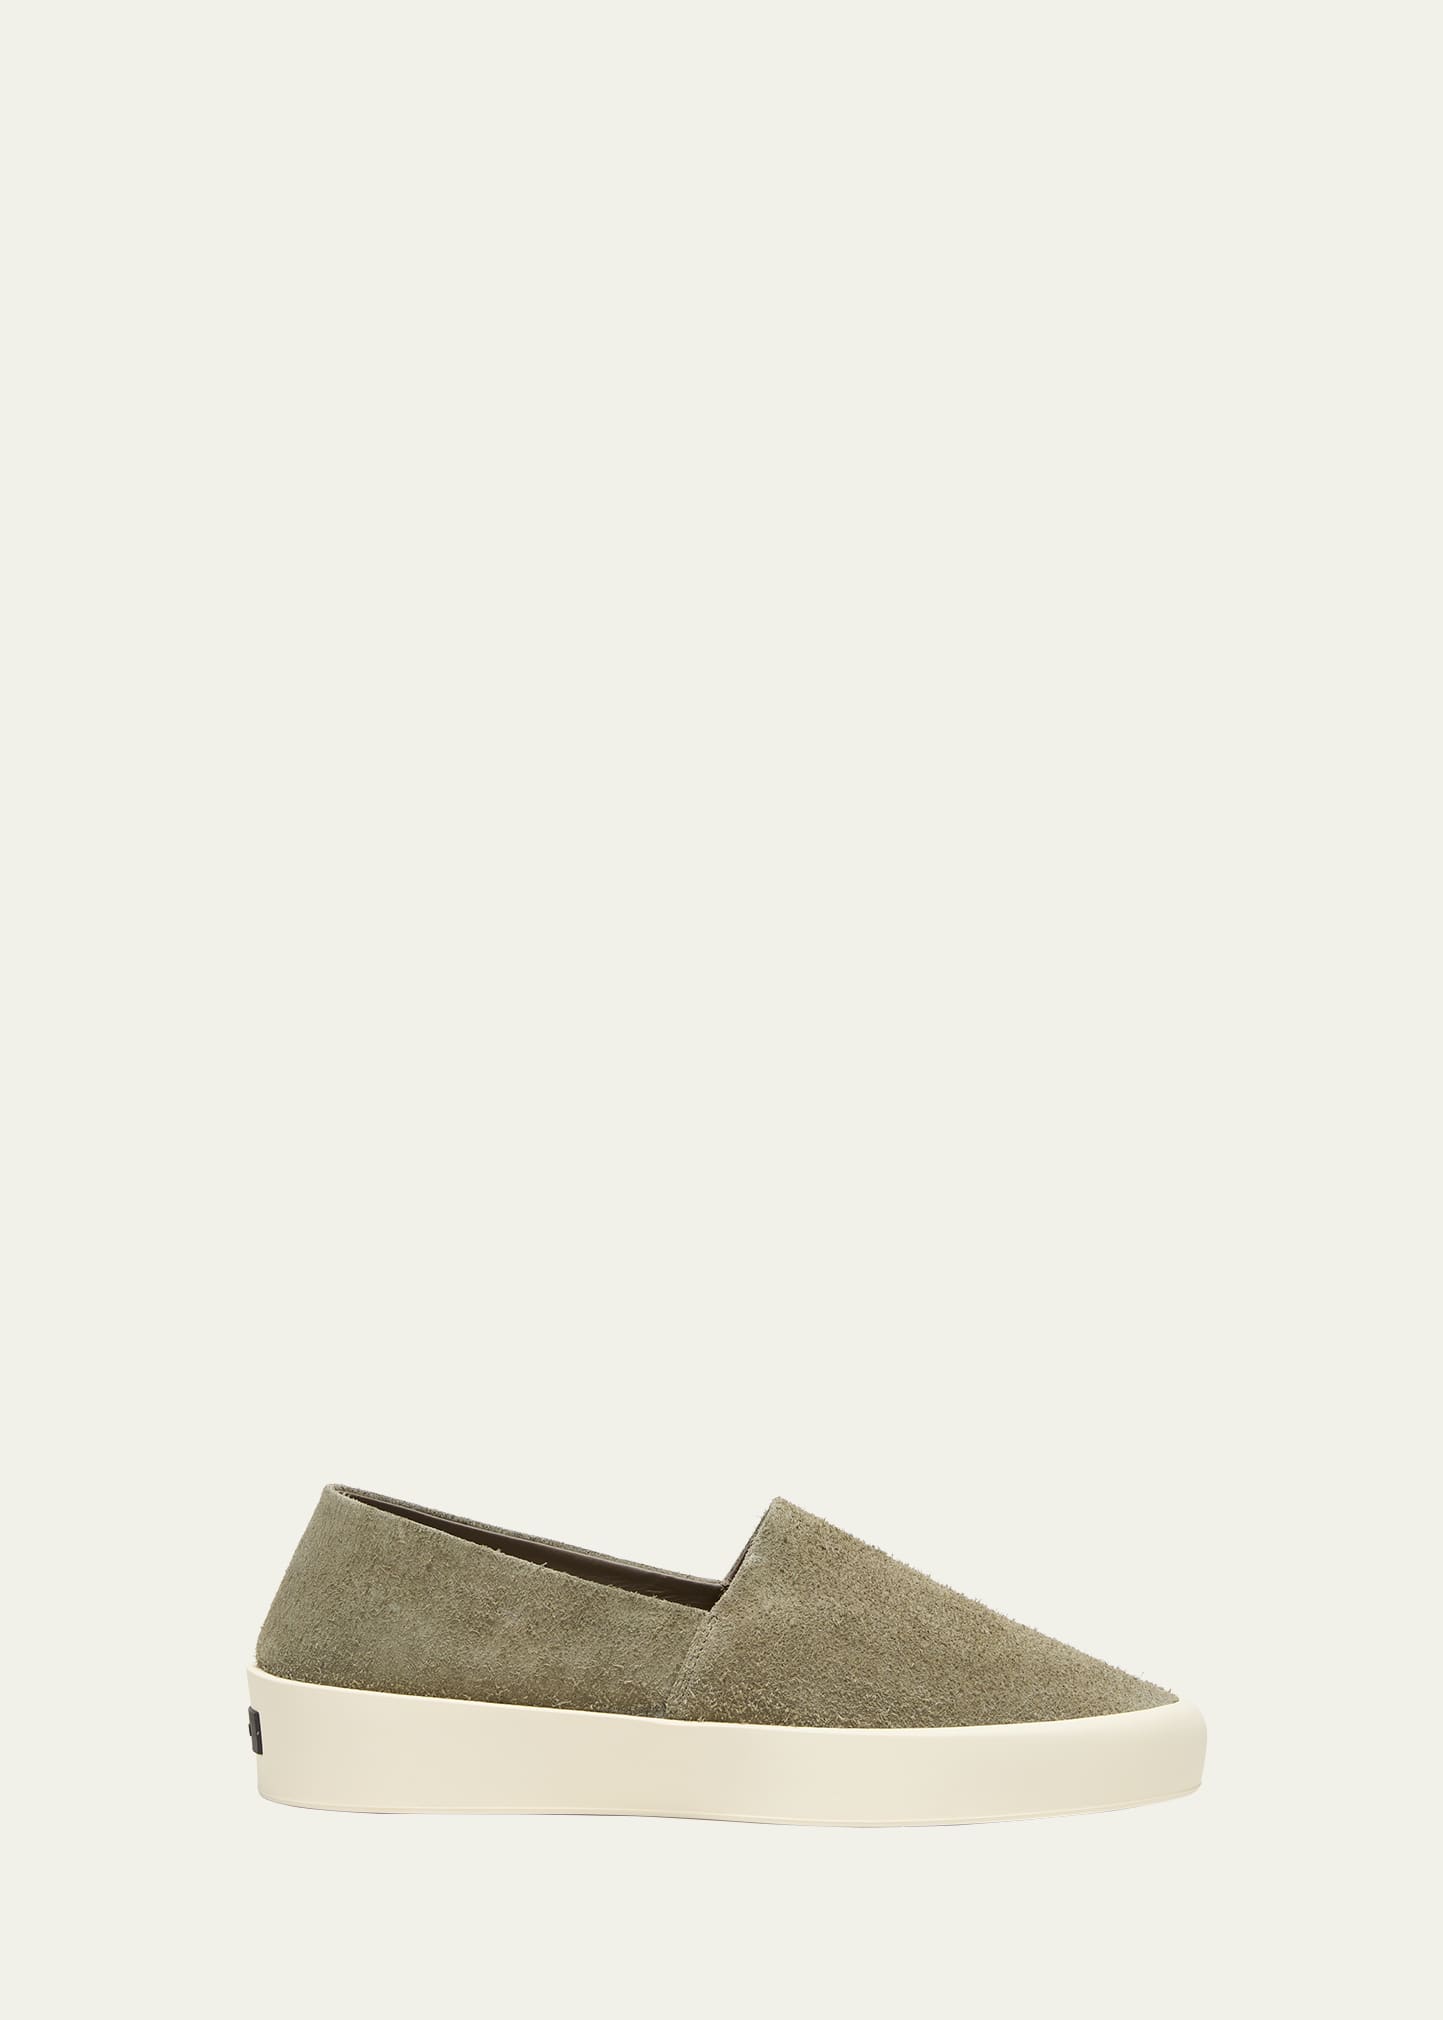 Fear Of God Men's Hairy Suede Espadrilles In Taupe